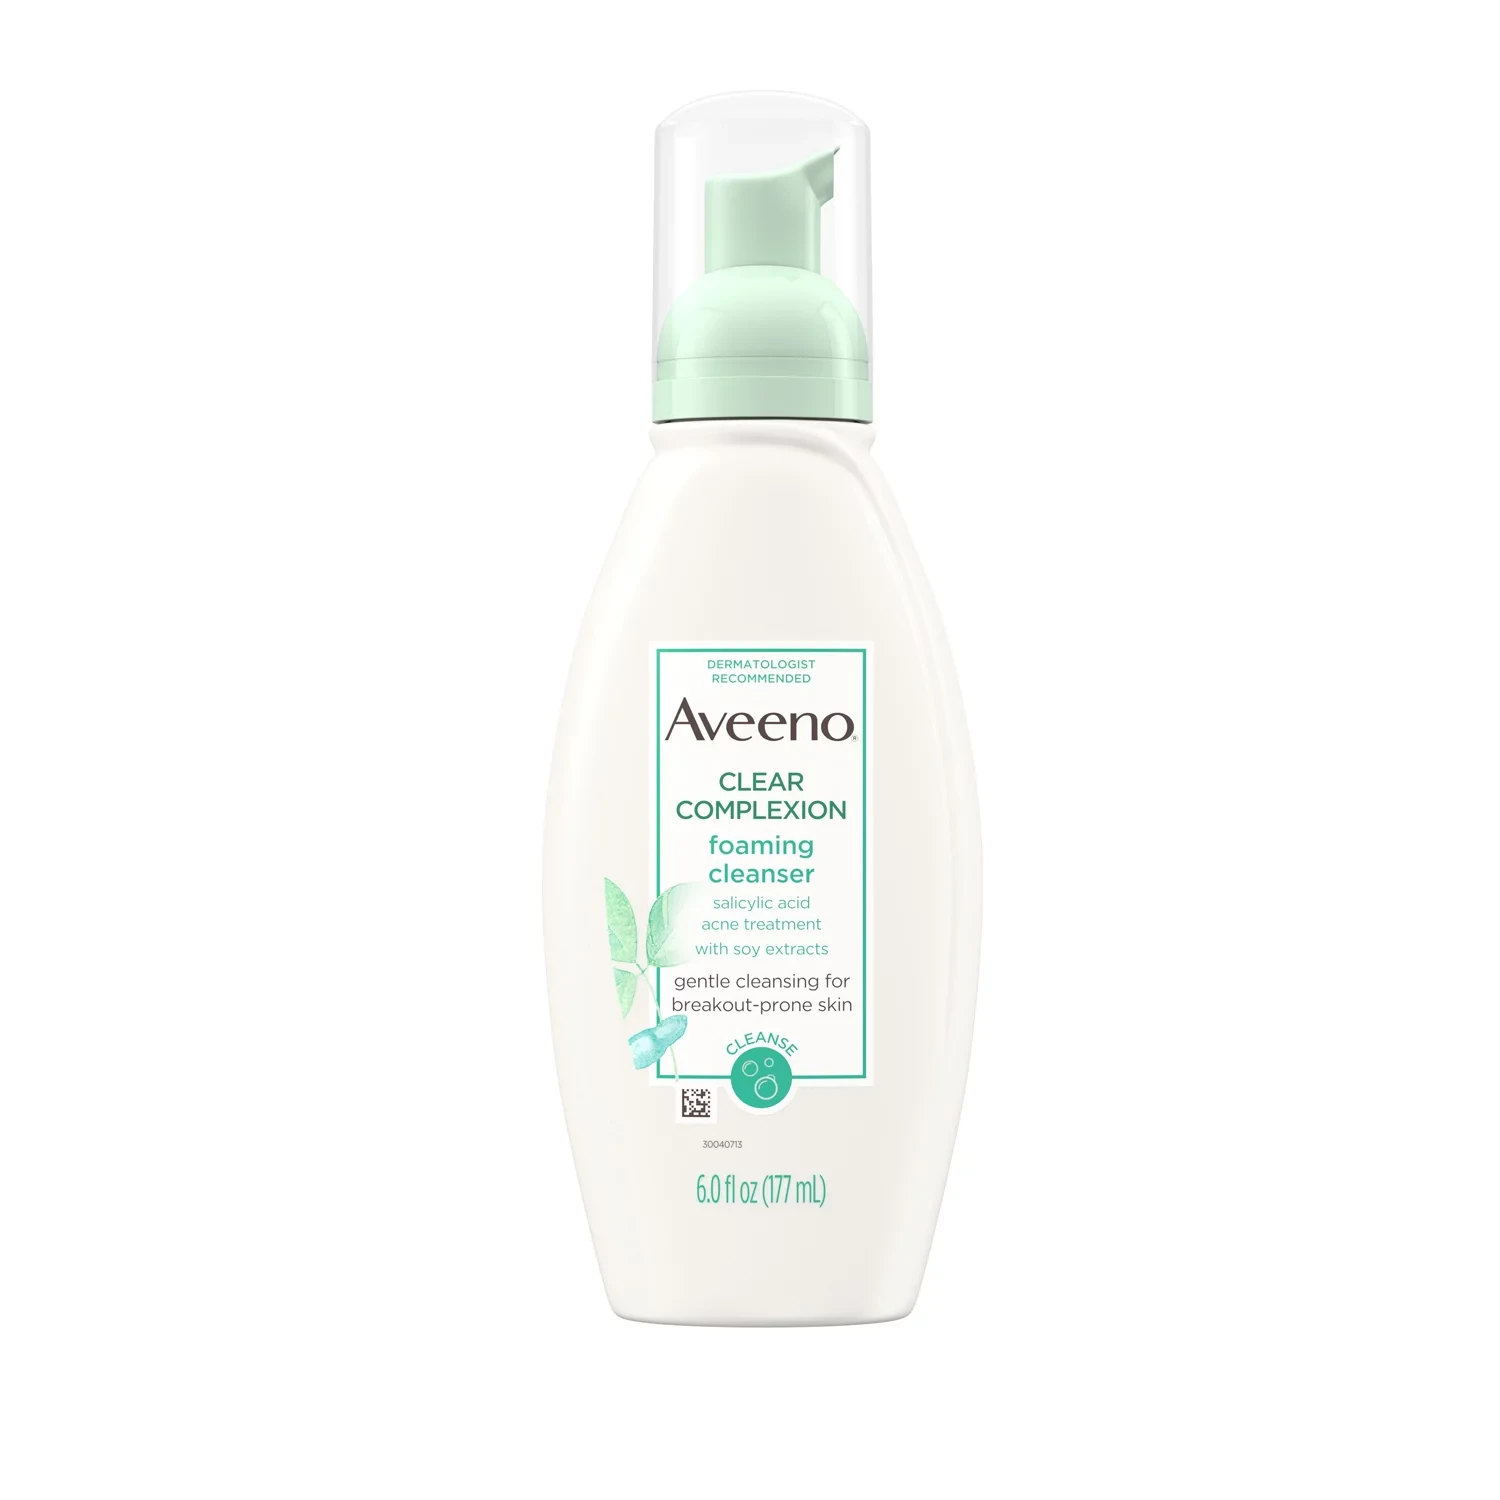 Aveeno Clear Complexion Foaming Cleanser 6 OZ